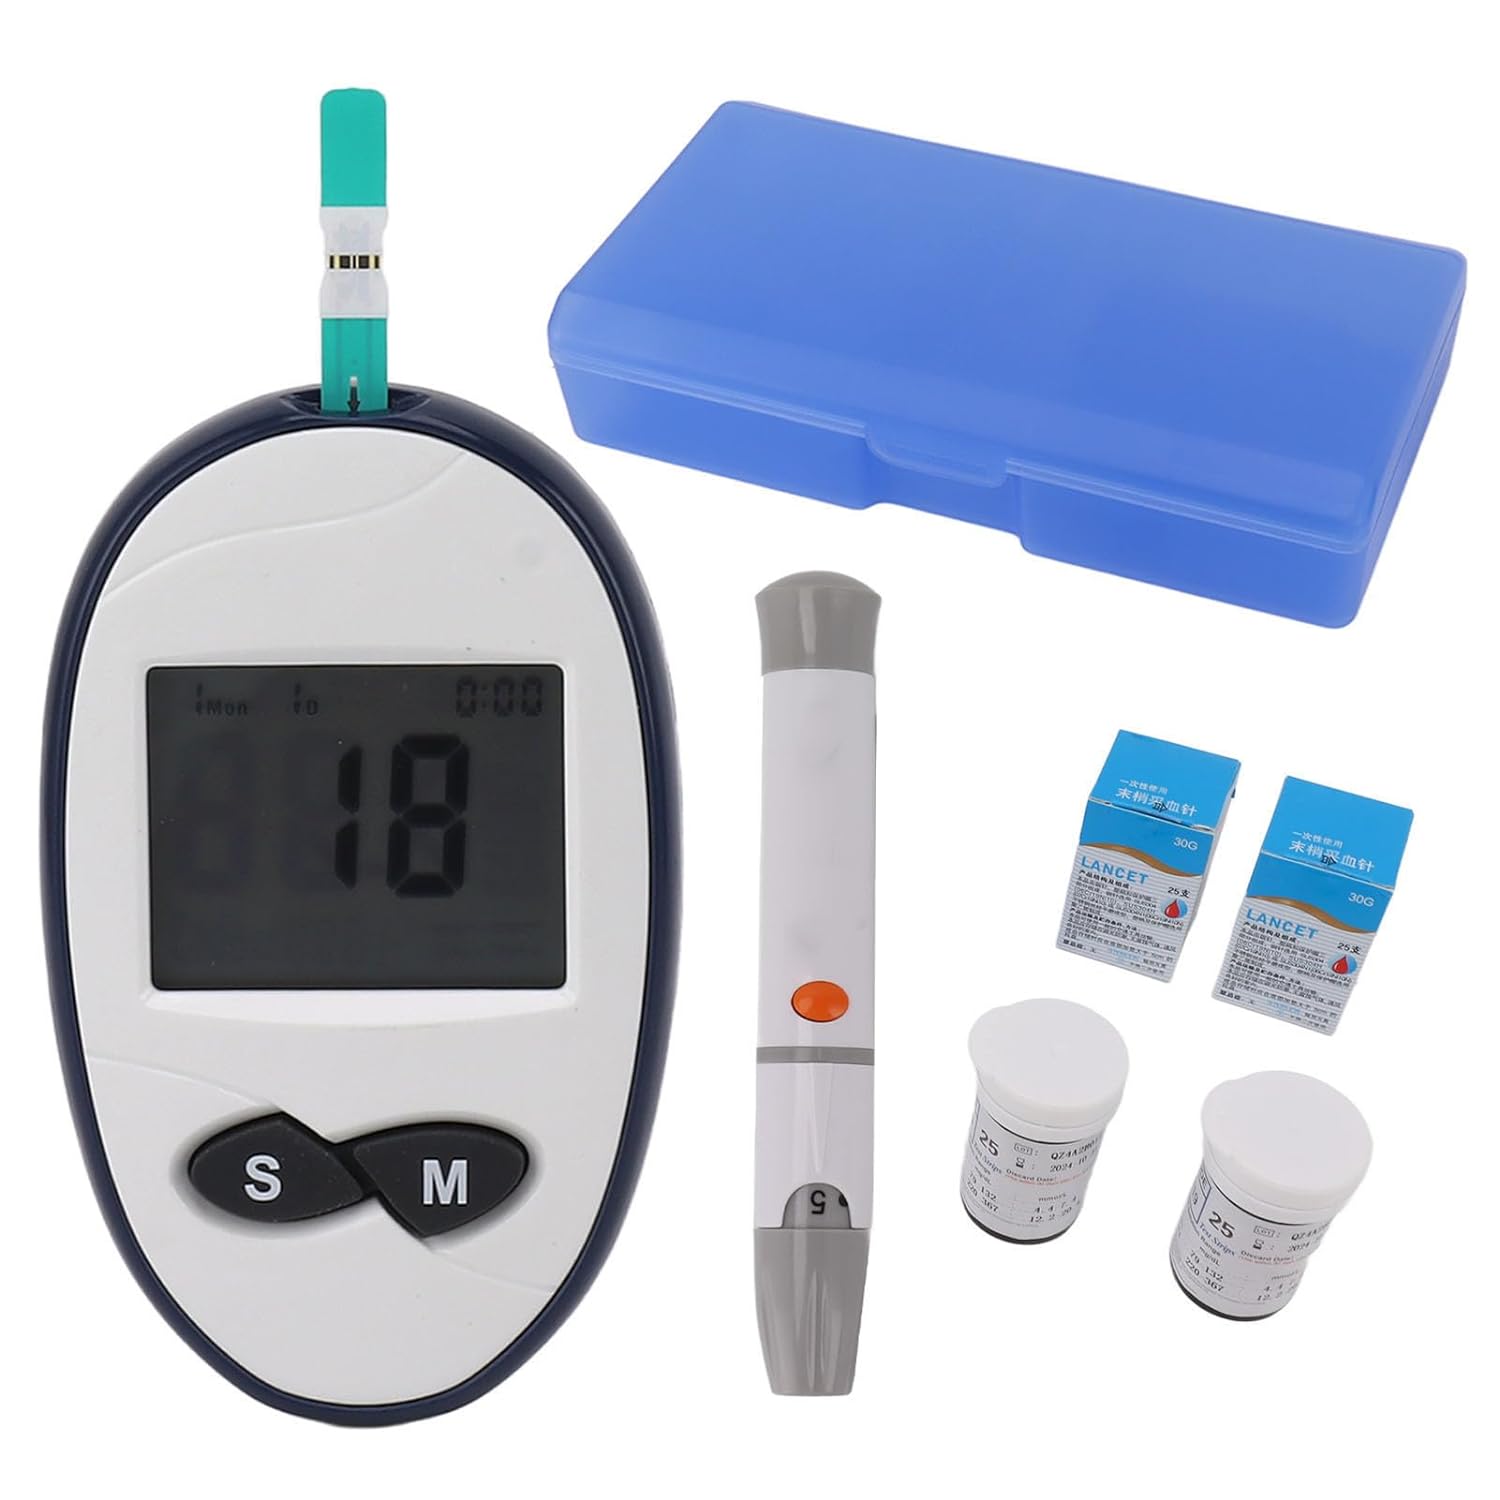 Home Blood Glucose Meter Blood Glucose Monitor Kit High Accuracy Blood Sugar Test Kit with Test Strips Blood Glucose Monitoring System Blood Sugar Test Kit